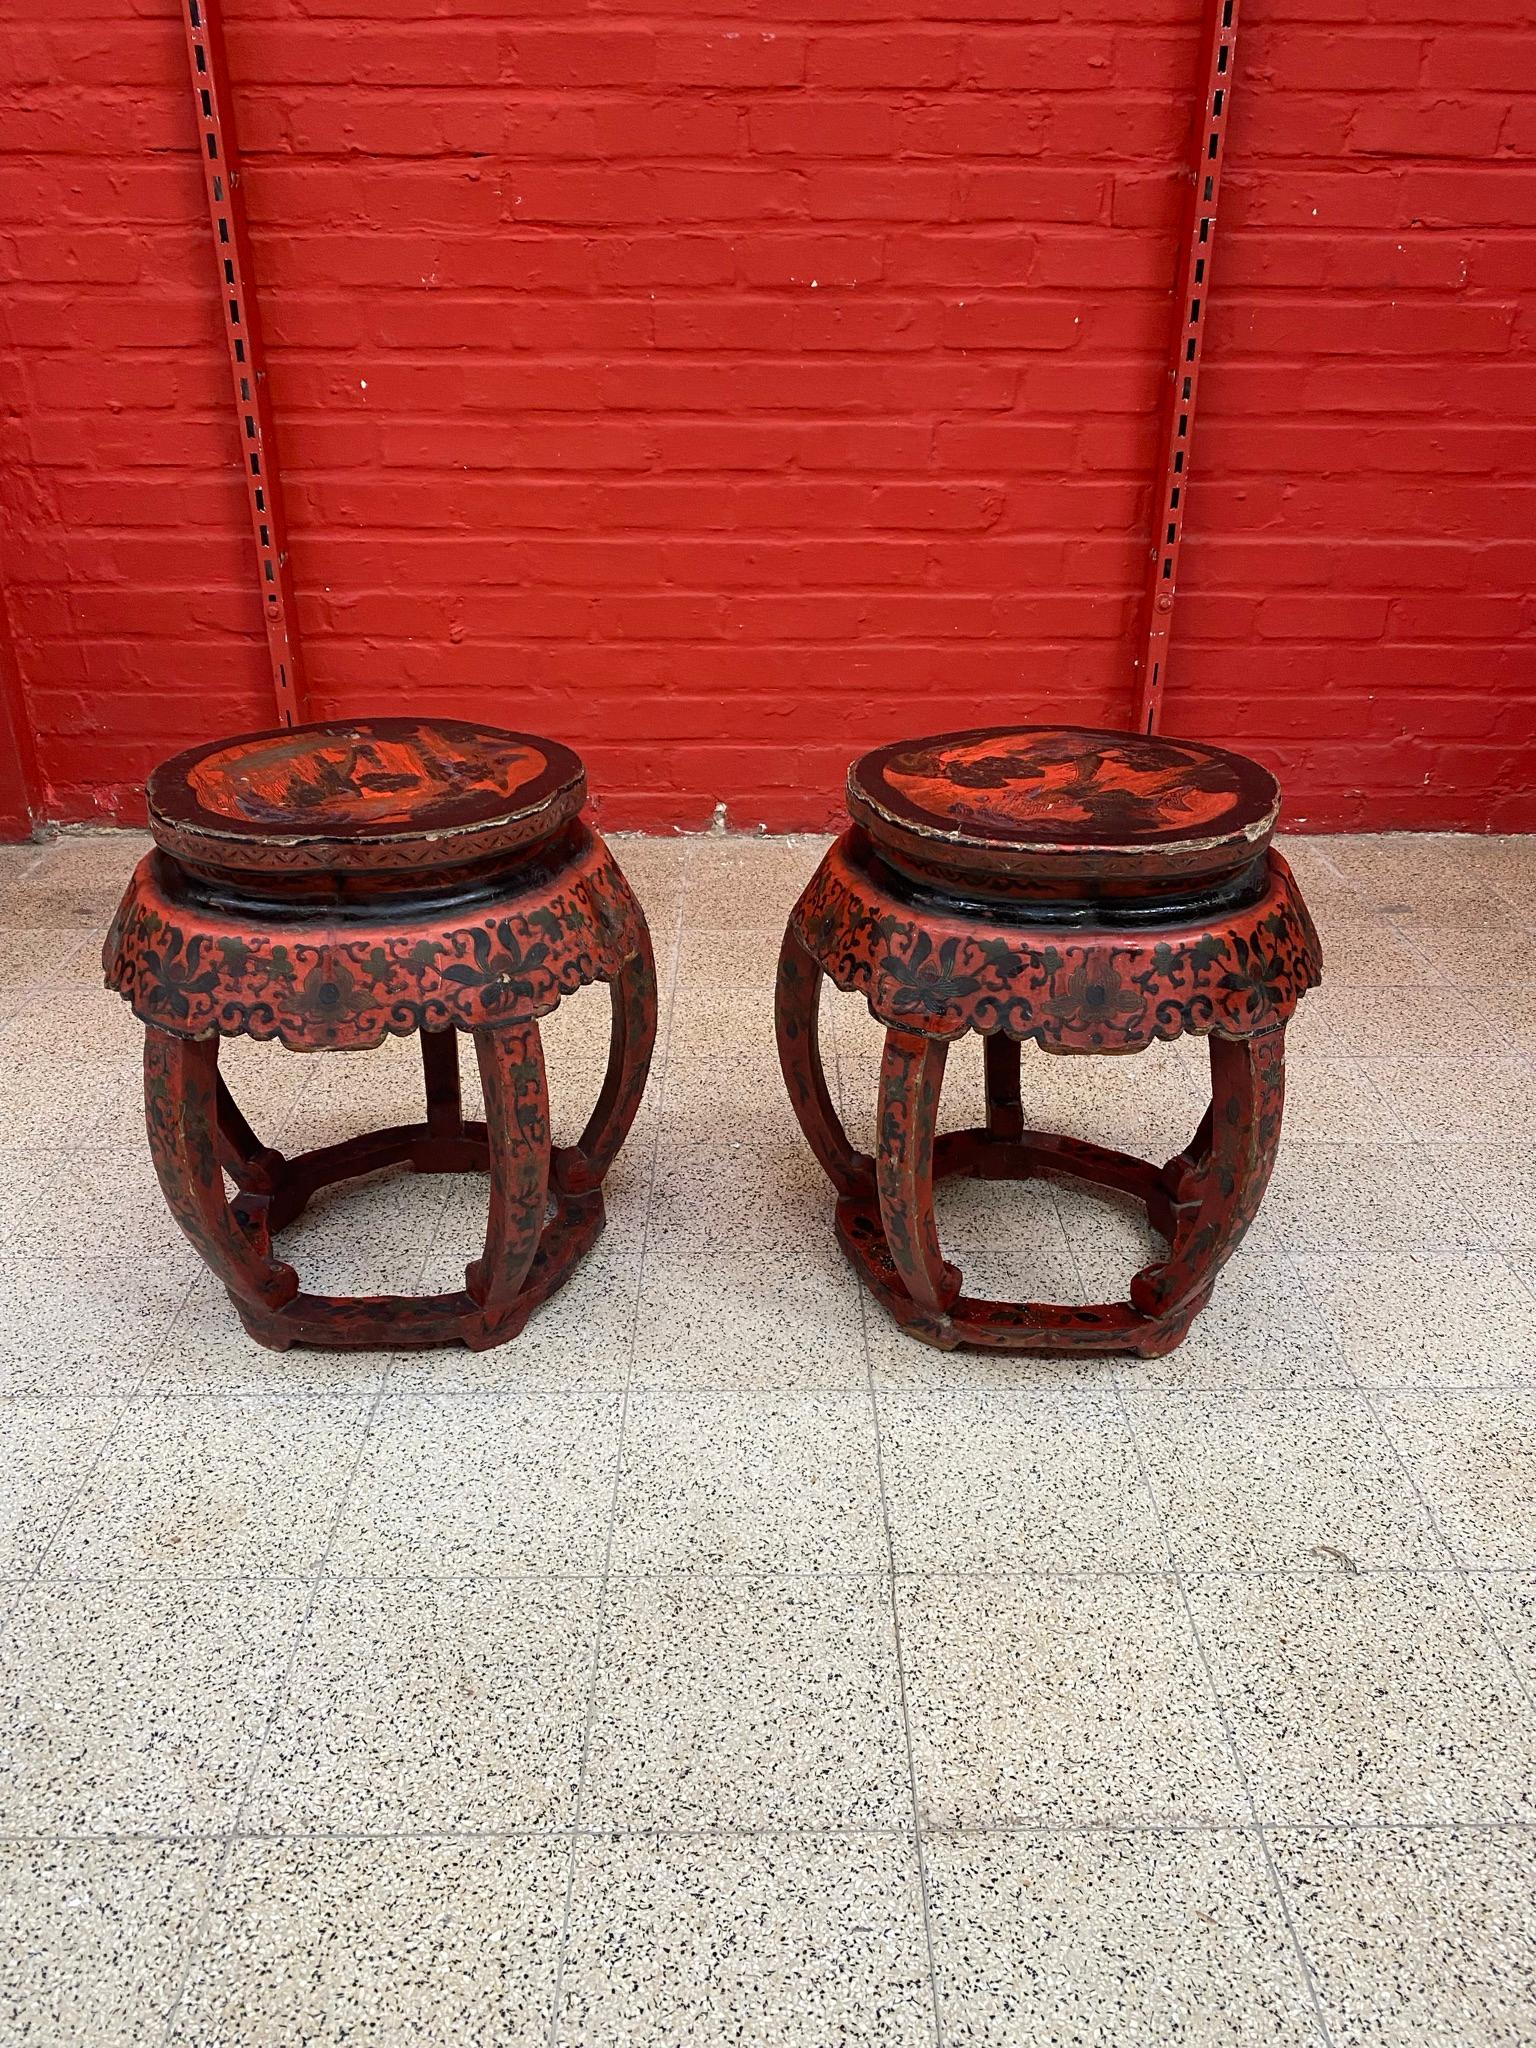 Pair of side tables in lacquered wood circa 1900
A lot of charm, with many lacks and faults.